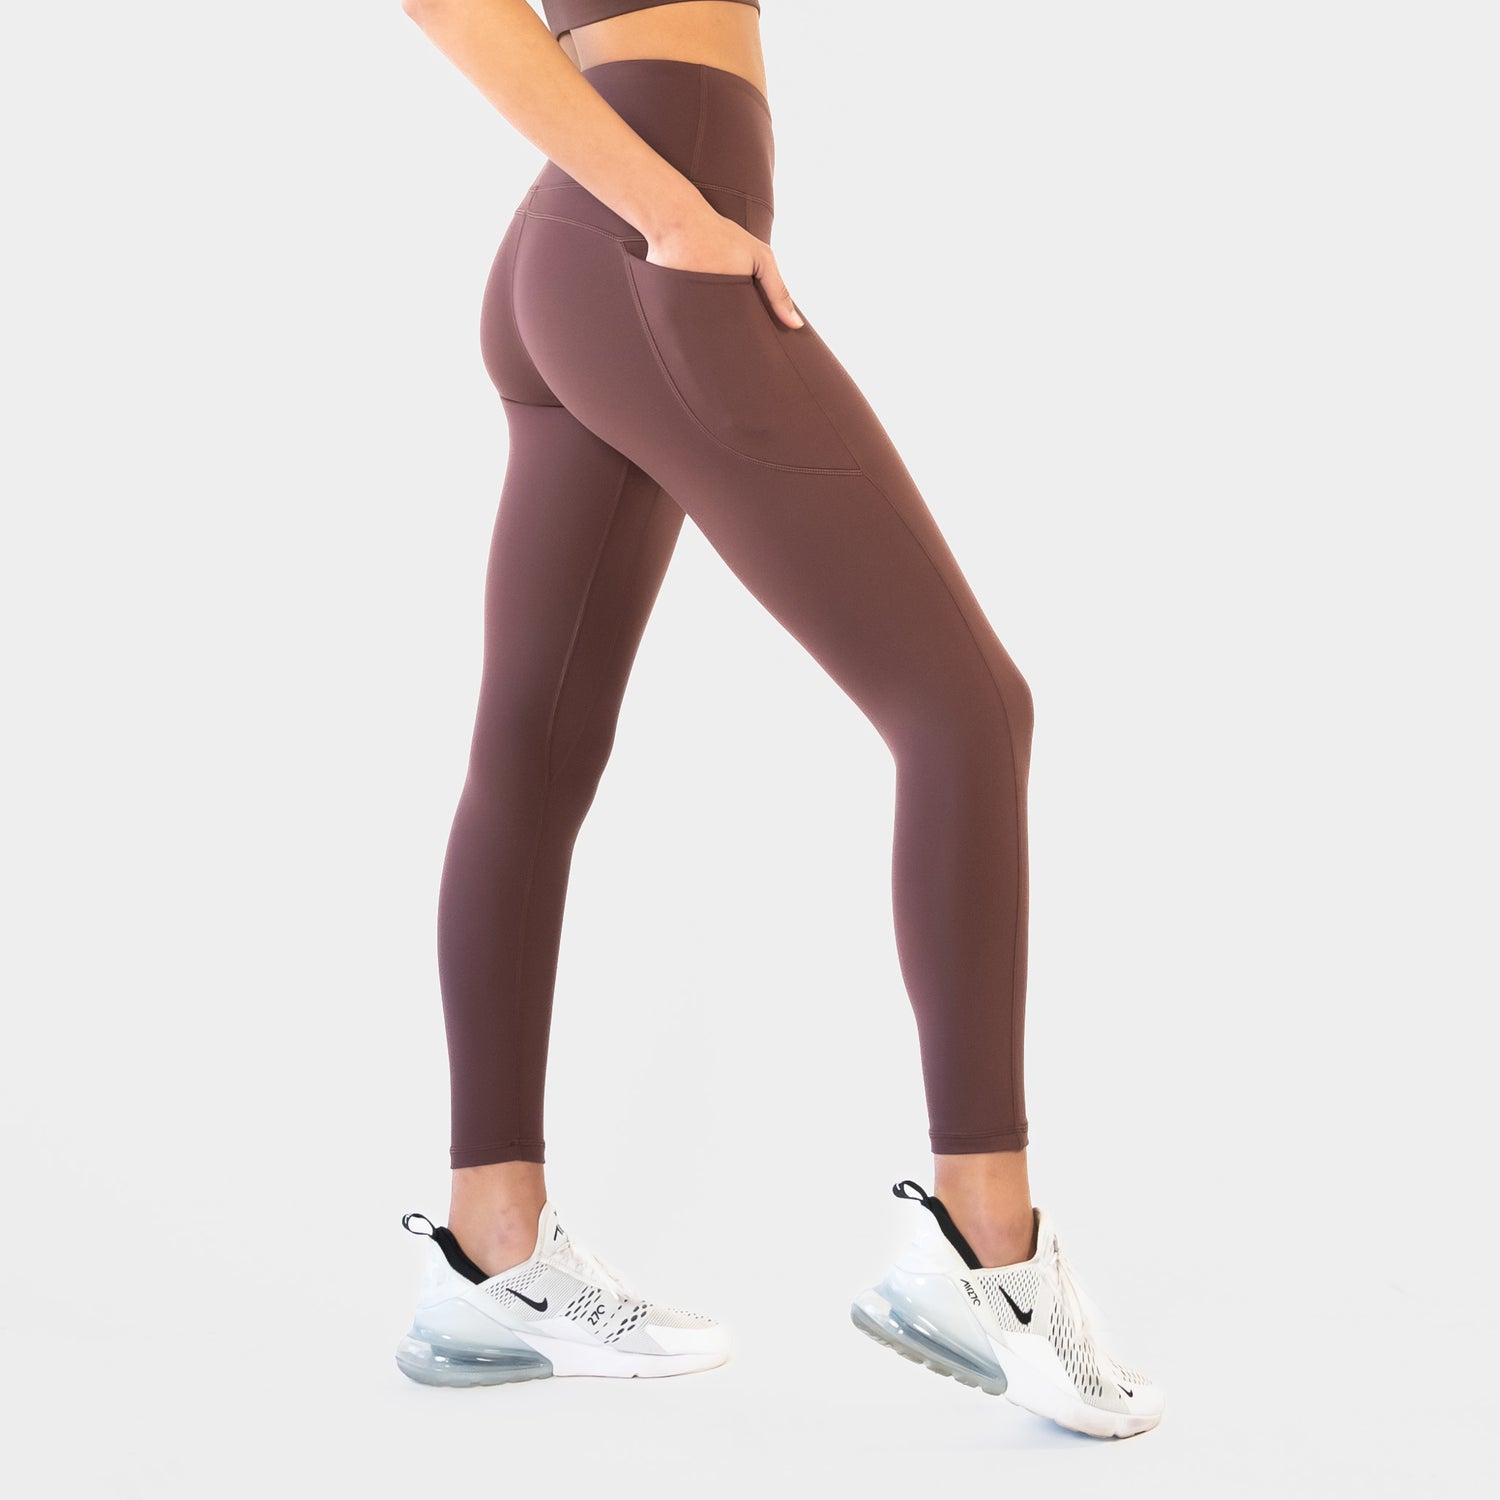 Senita Athletics - Our full length Pinnacle Pants are high waisted, sleek,  soft and VERY flattering.